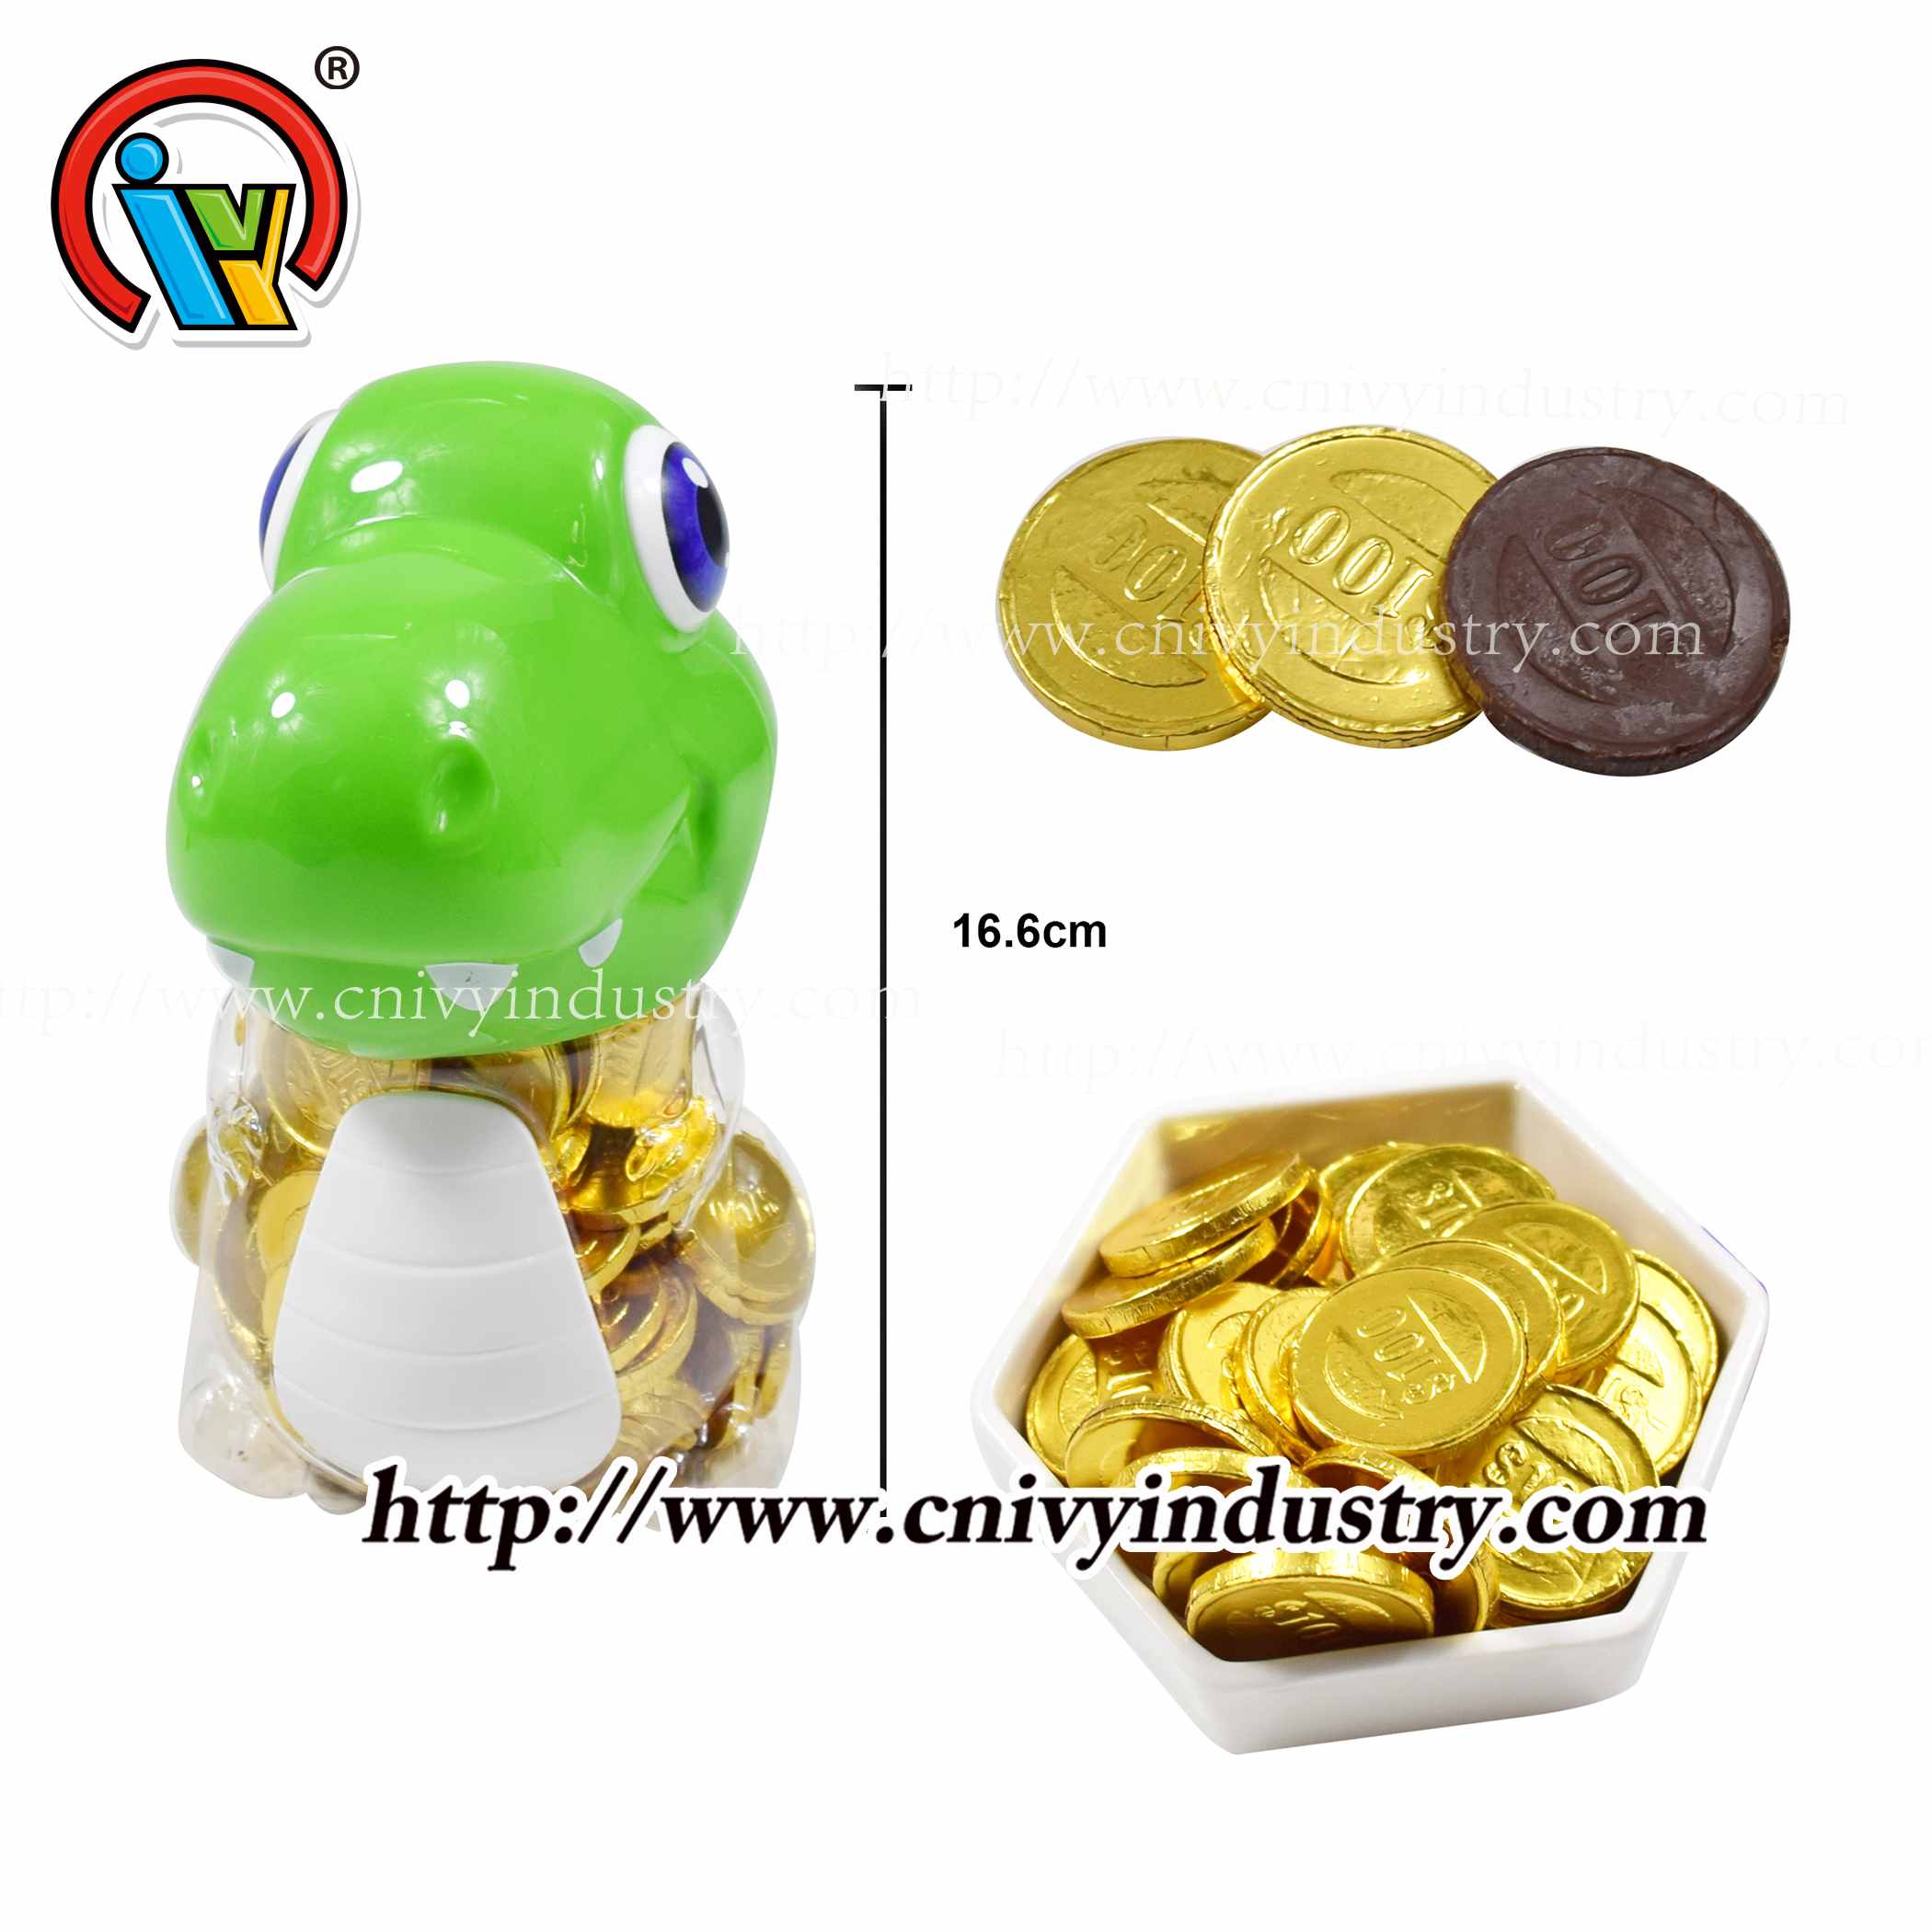 Chocolate coin candy